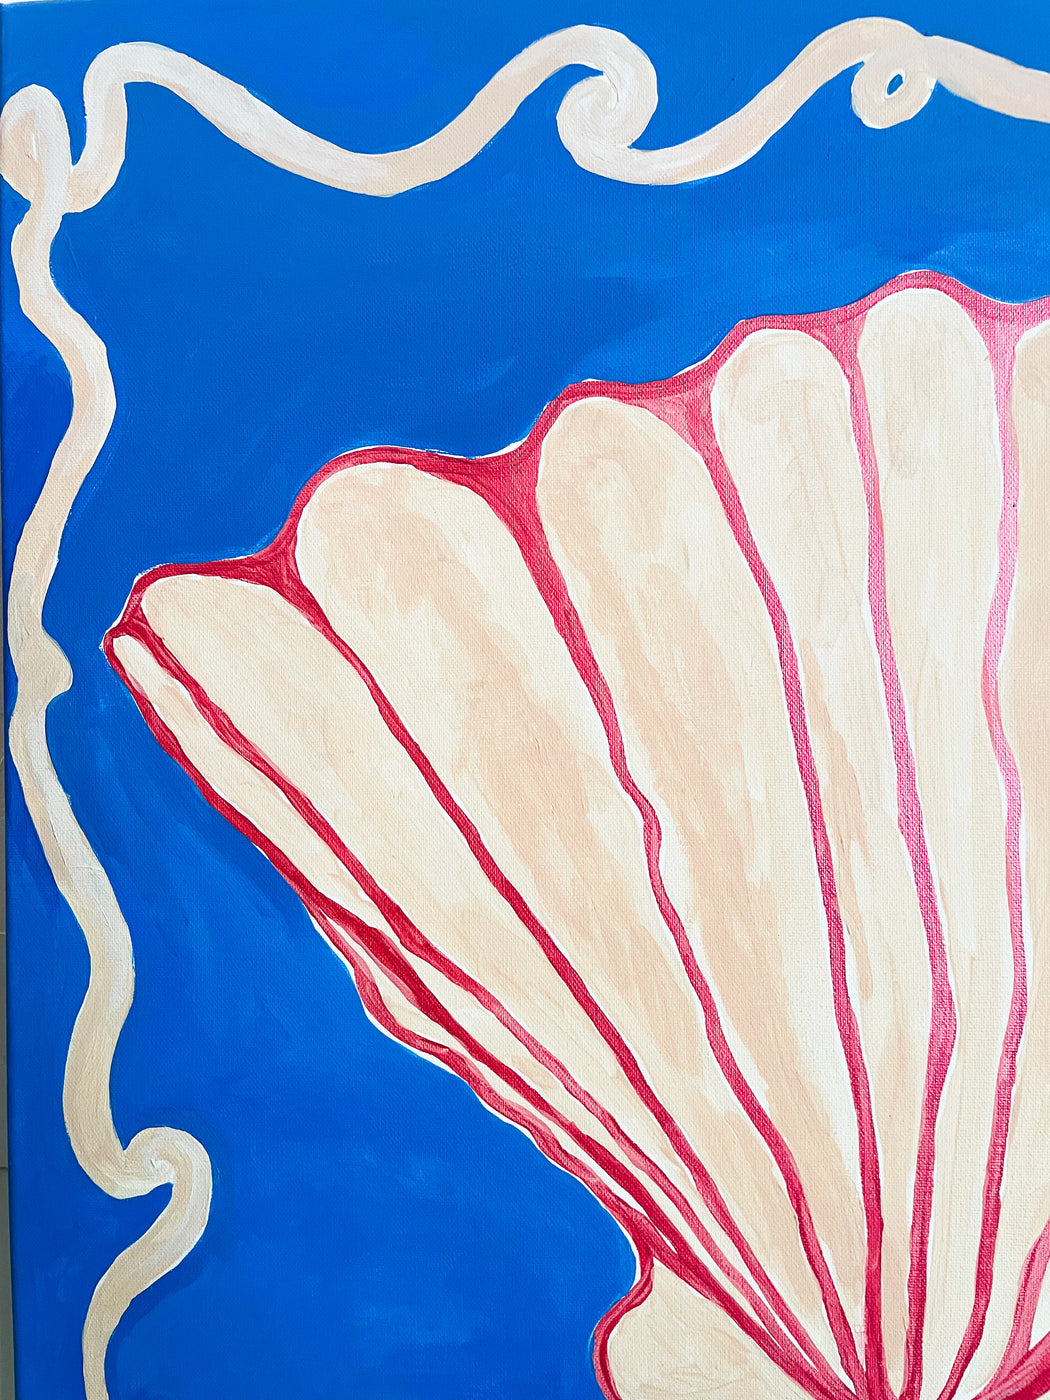 SHELLS IN BLUE - PAINTING ON CANVAS 120 X 70 CM